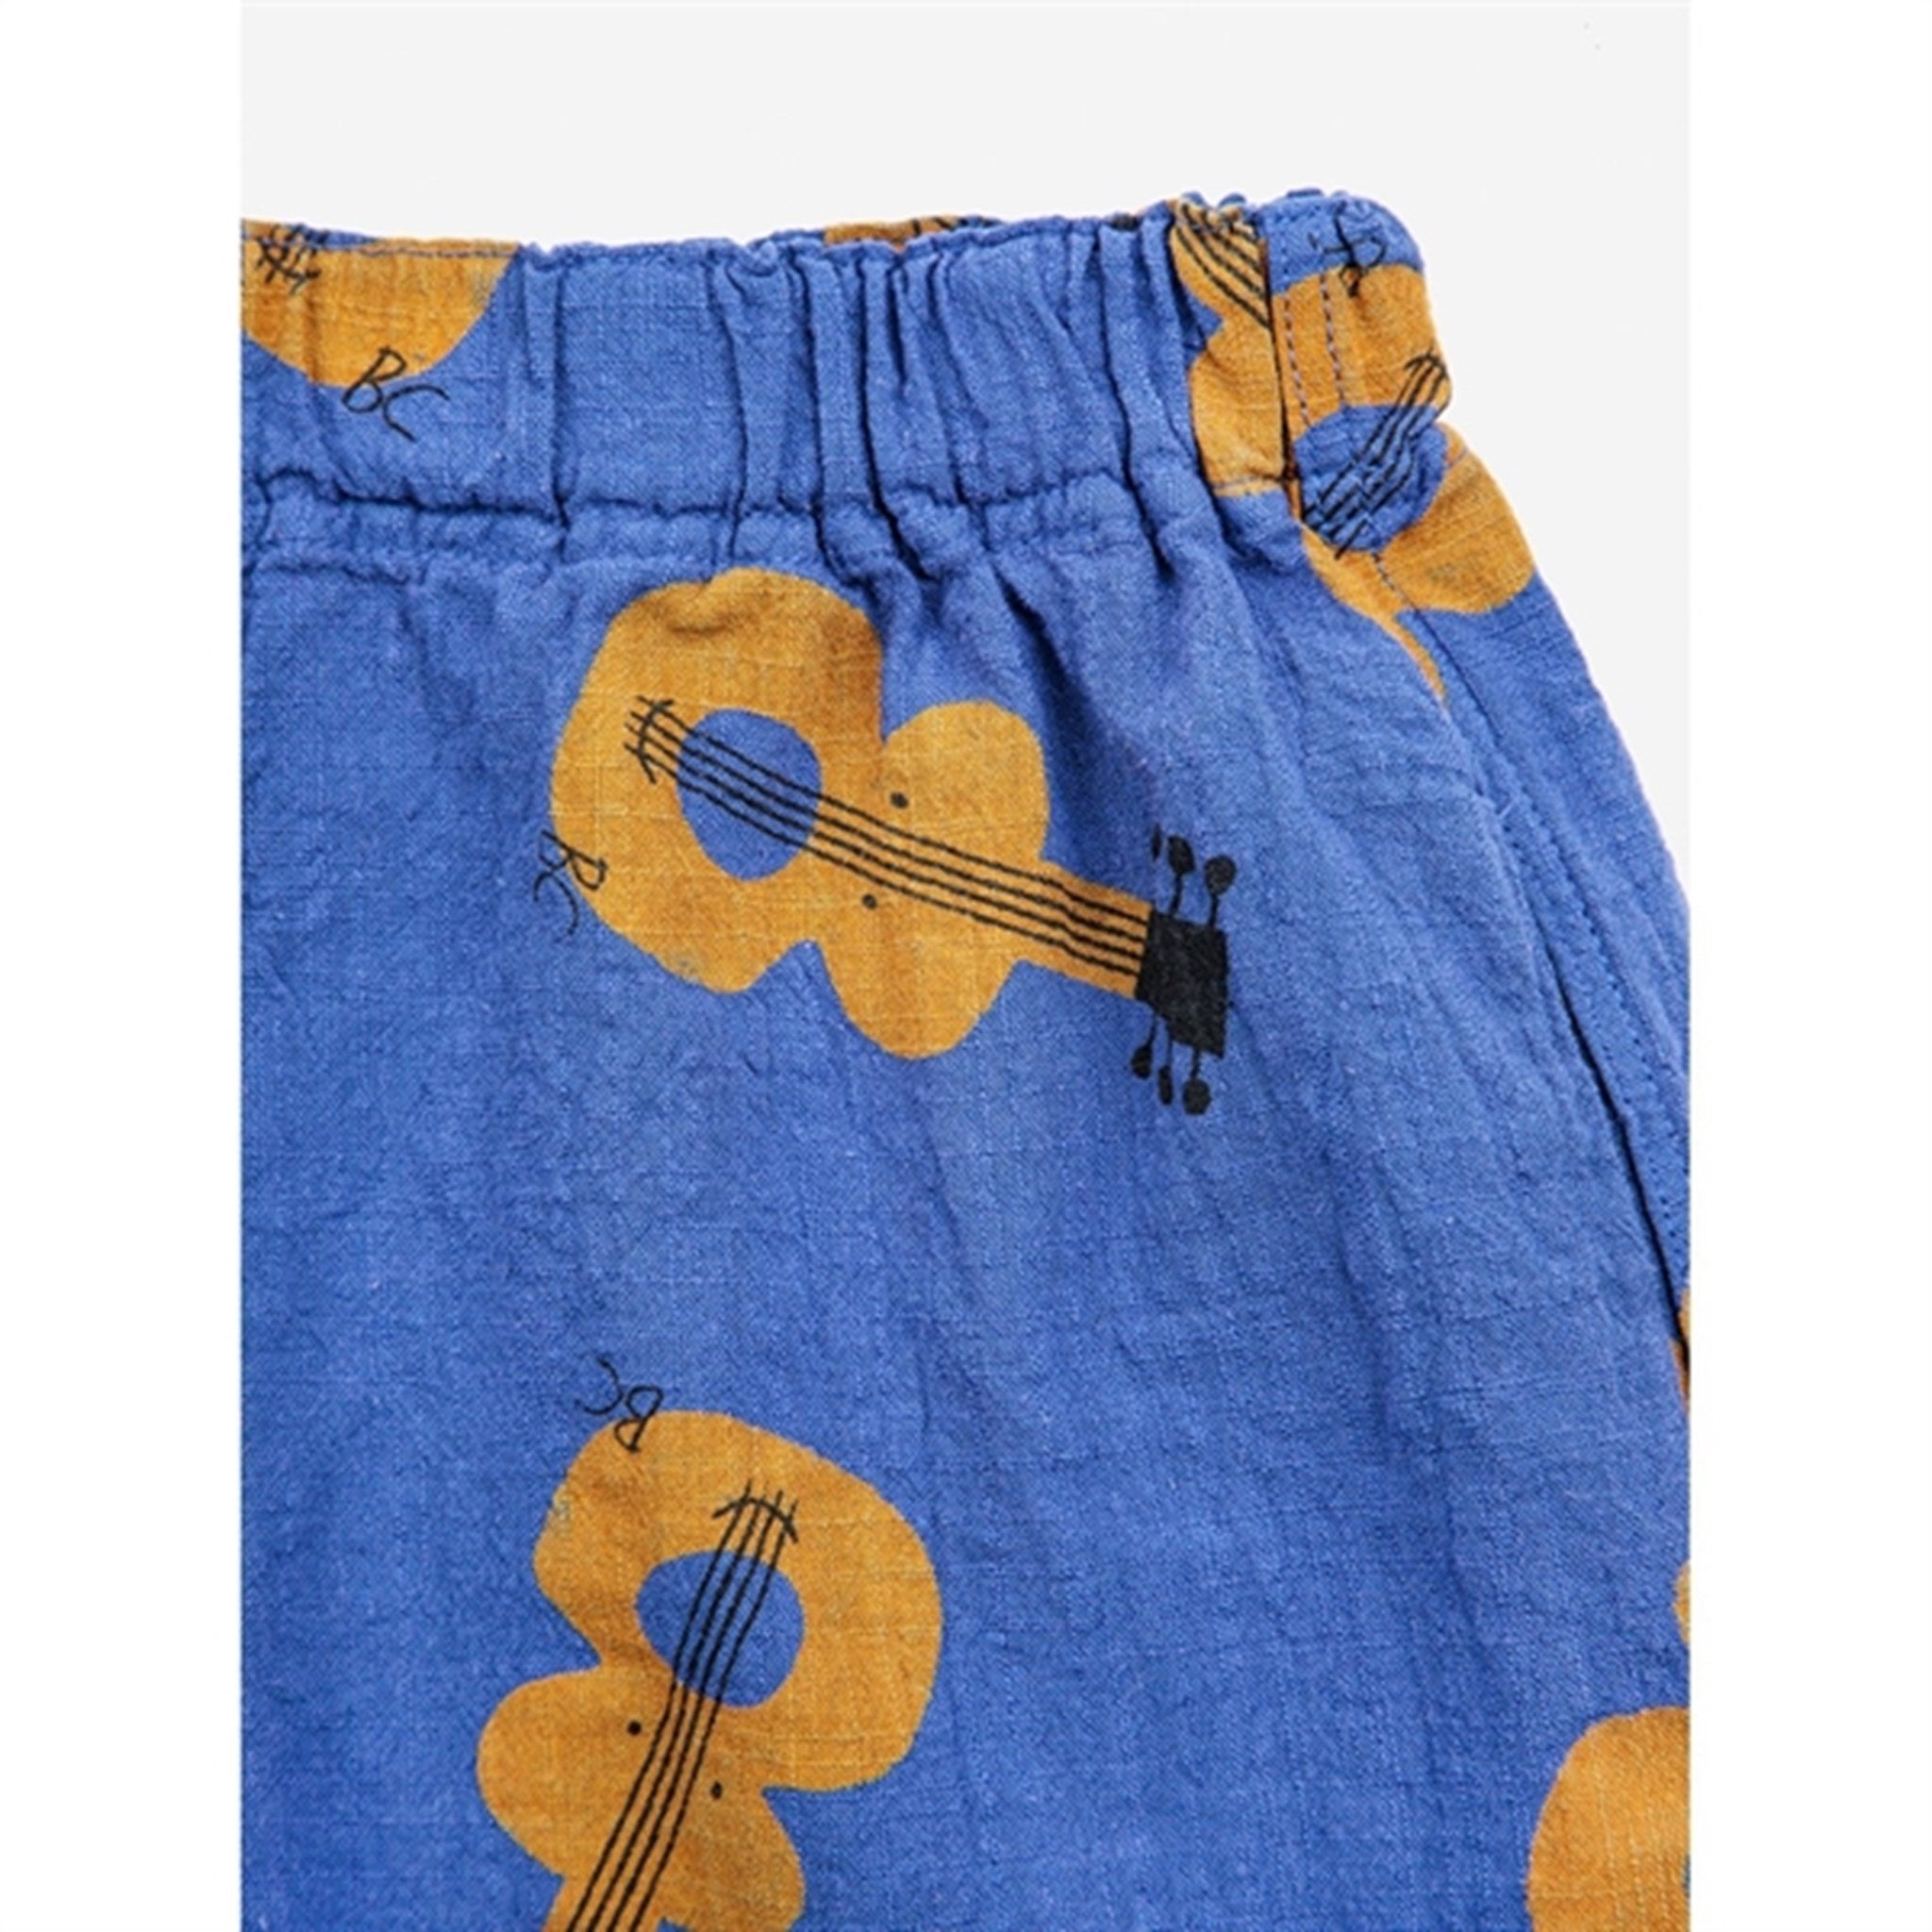 Bobo Choses Acoustic Guitar All Over Woven Shorts Navy Blue 3